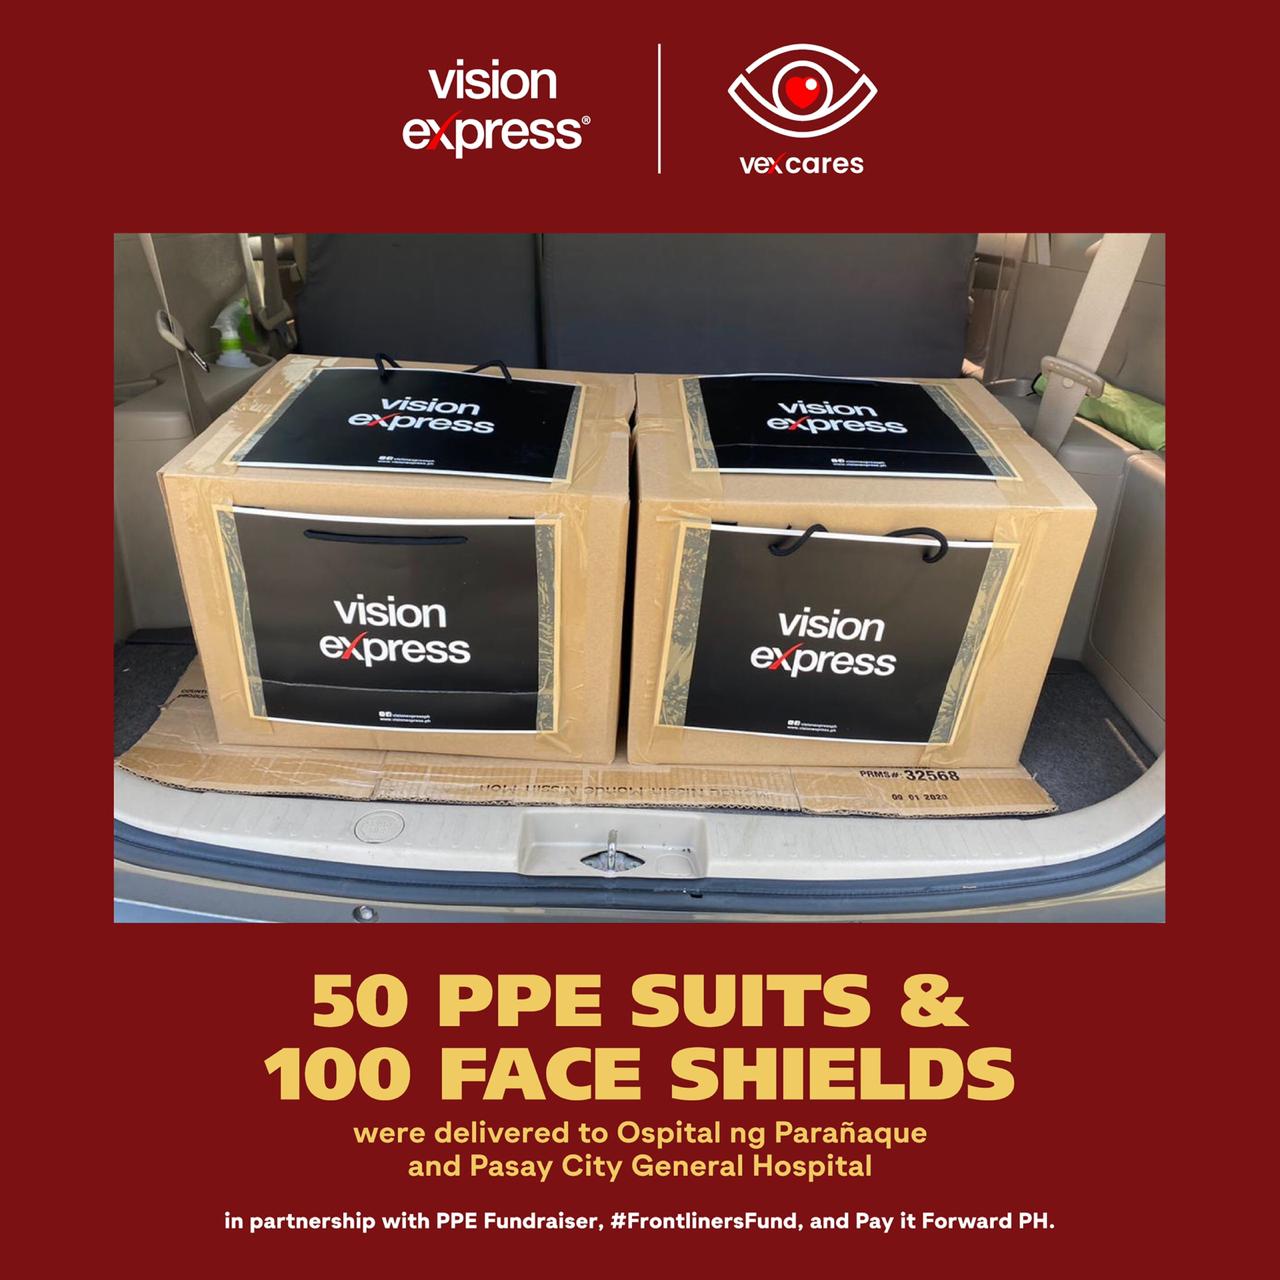 Vision Express donates Face Shields and PPE's to frontliners - Vision Express Philippines